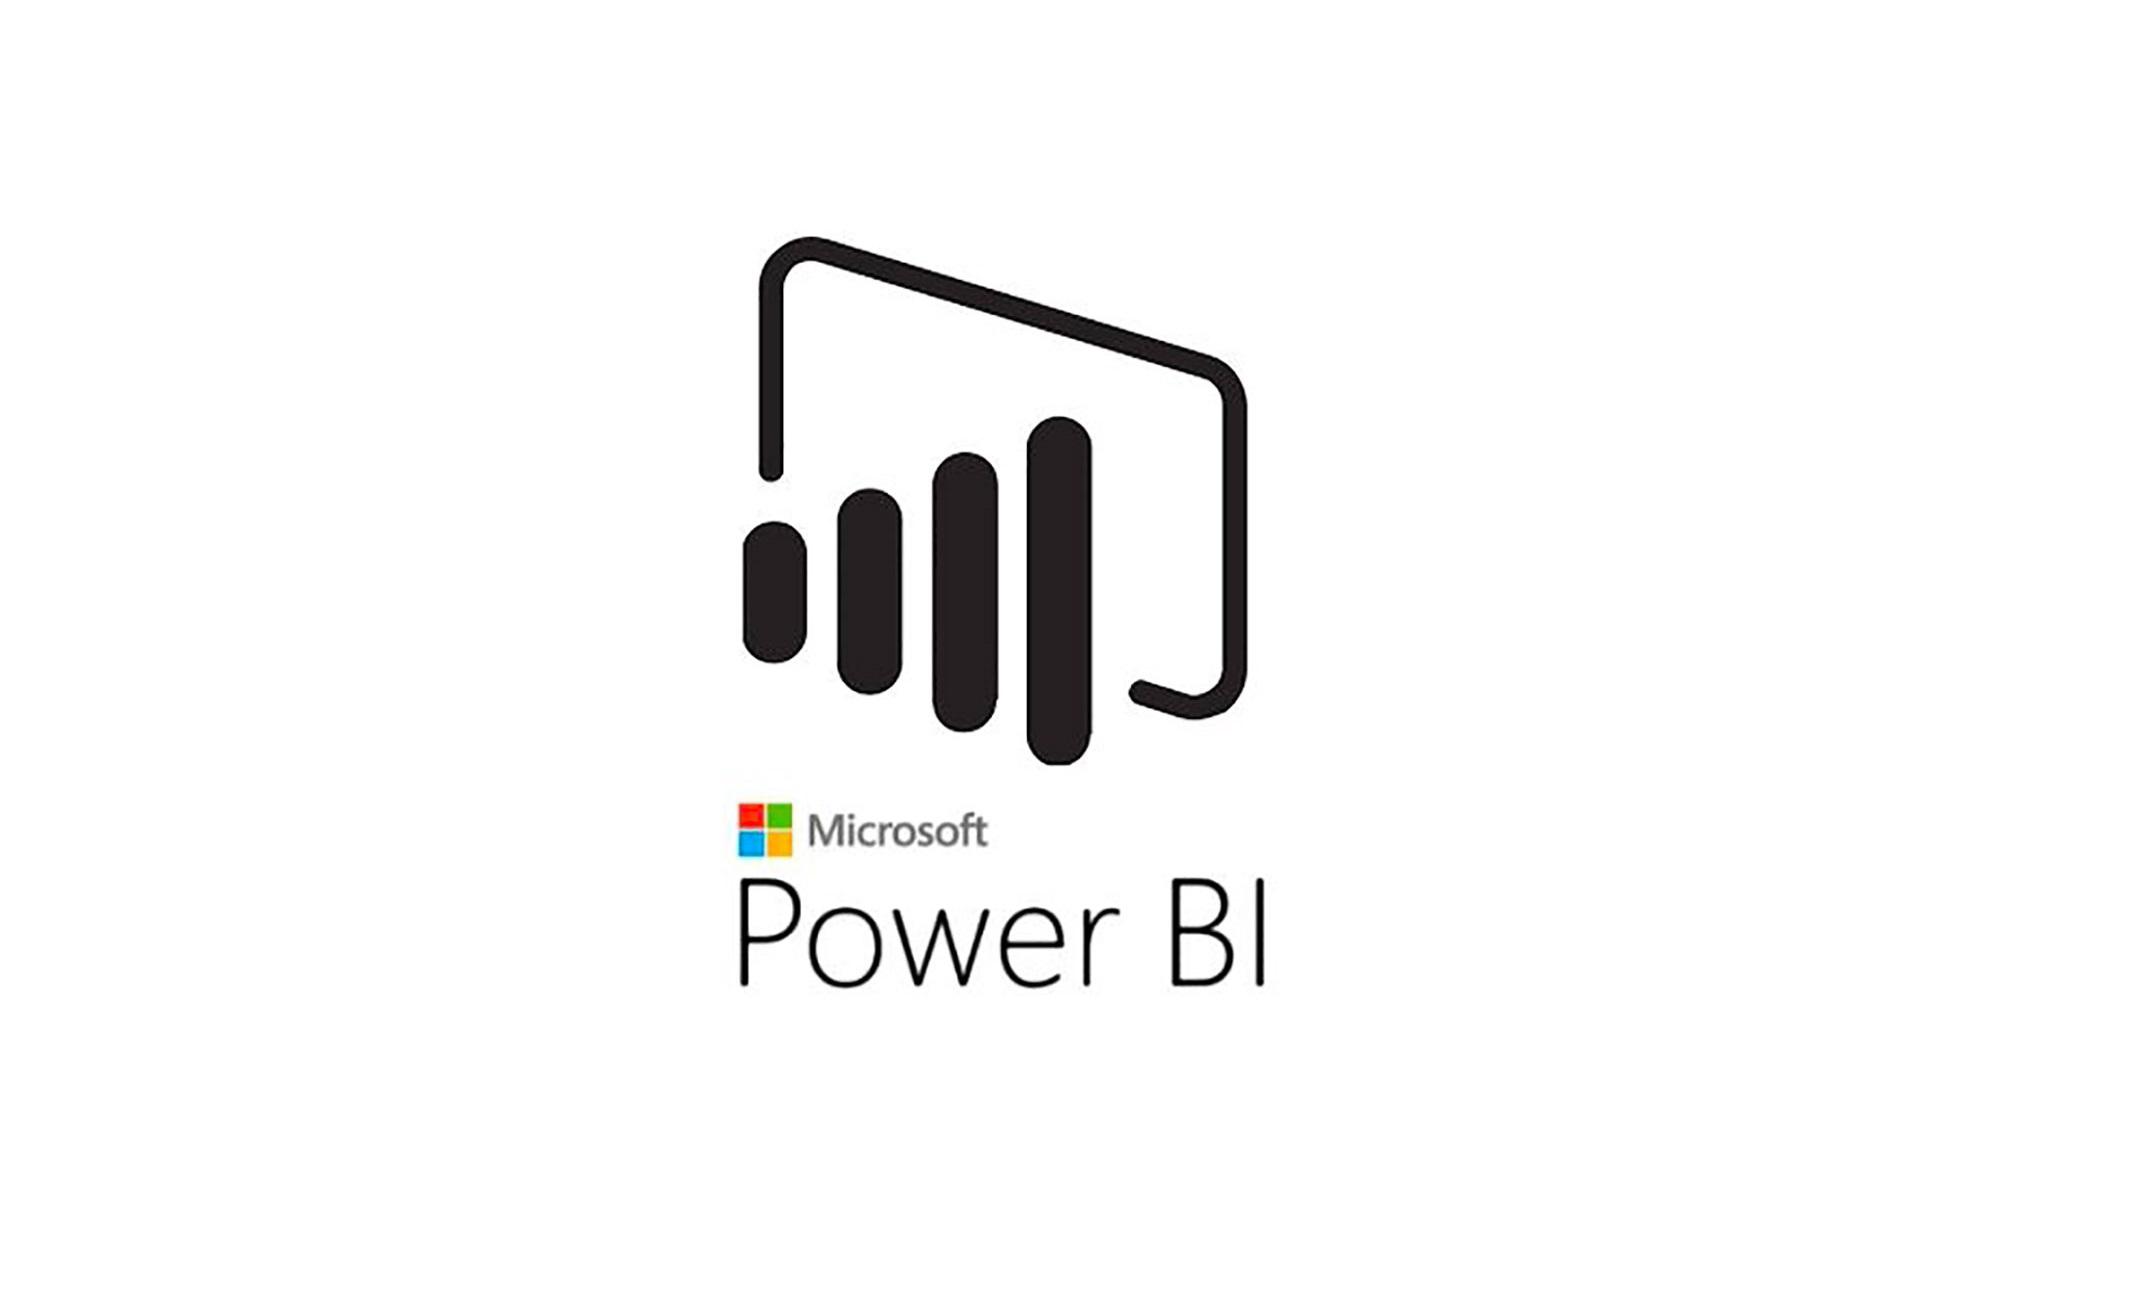 4 Weeks Microsoft Power BI Training in Pleasanton | Introduction to Power BI training for beginners | Getting started with Power BI | What is Power BI | March 30, 2020 - April 22, 2020